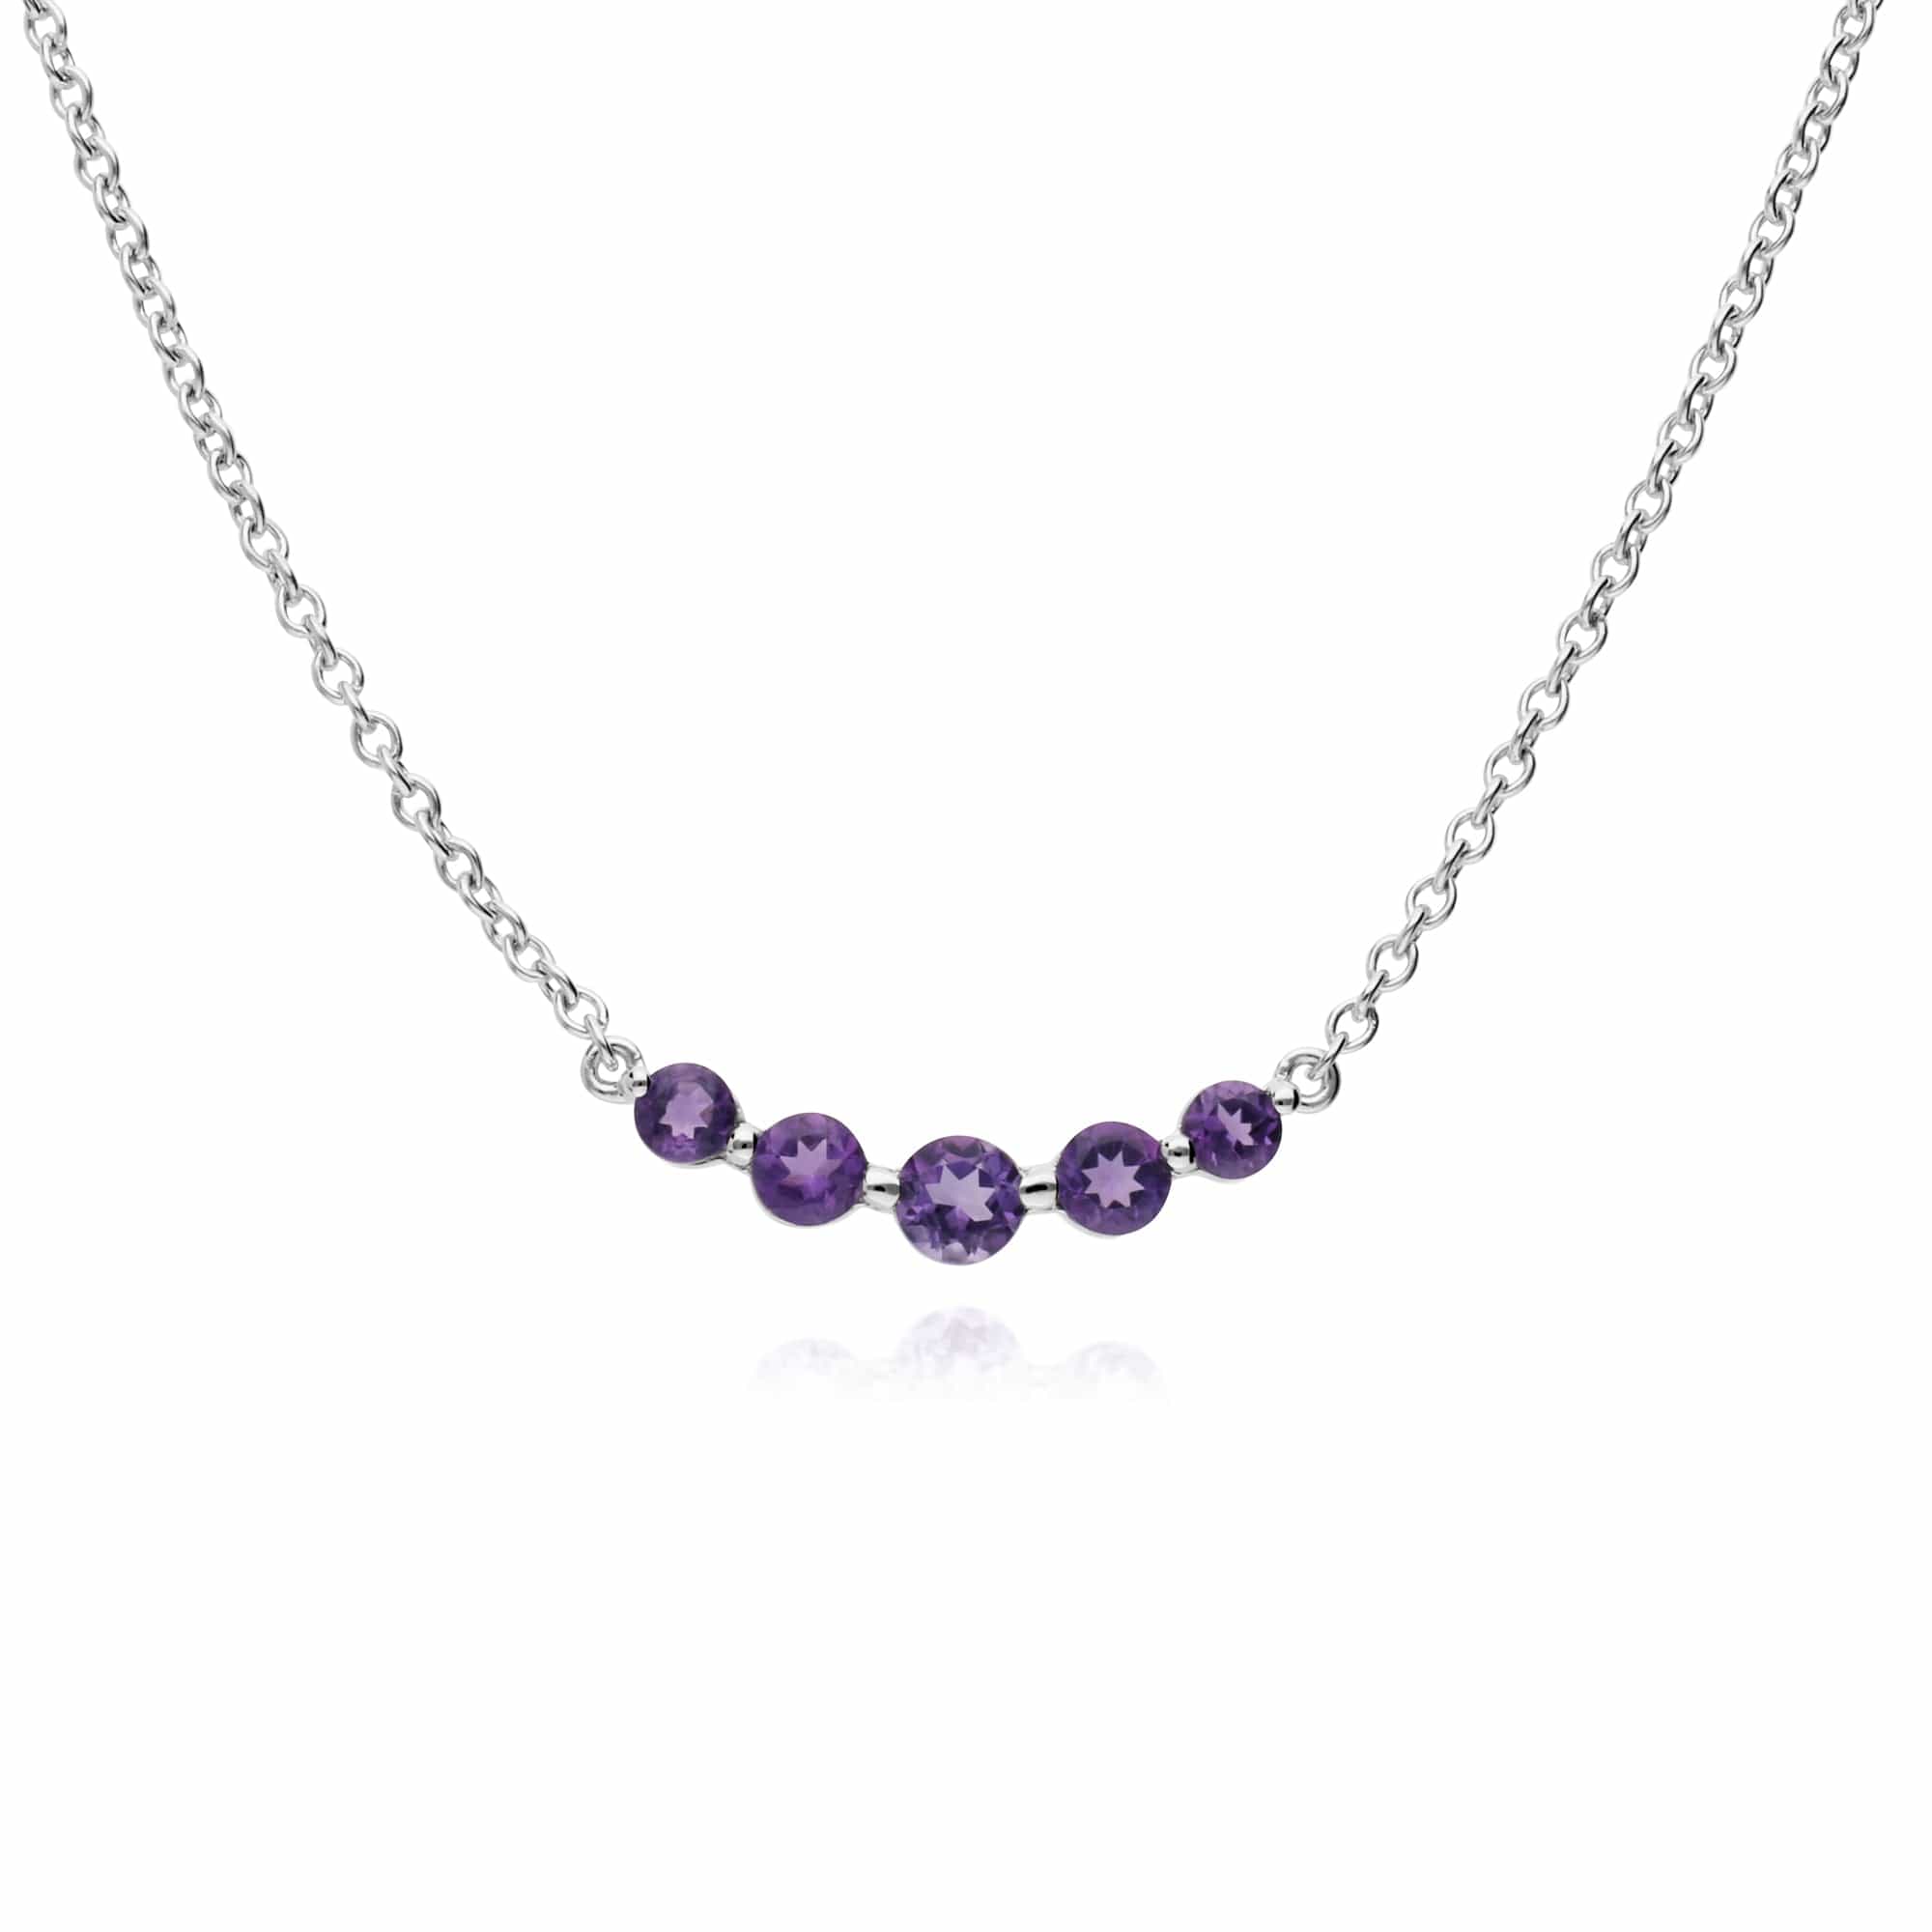 Classic Round Amethyst Gradient 5 Stone Necklace in 925 Sterling Silver - Gemondo